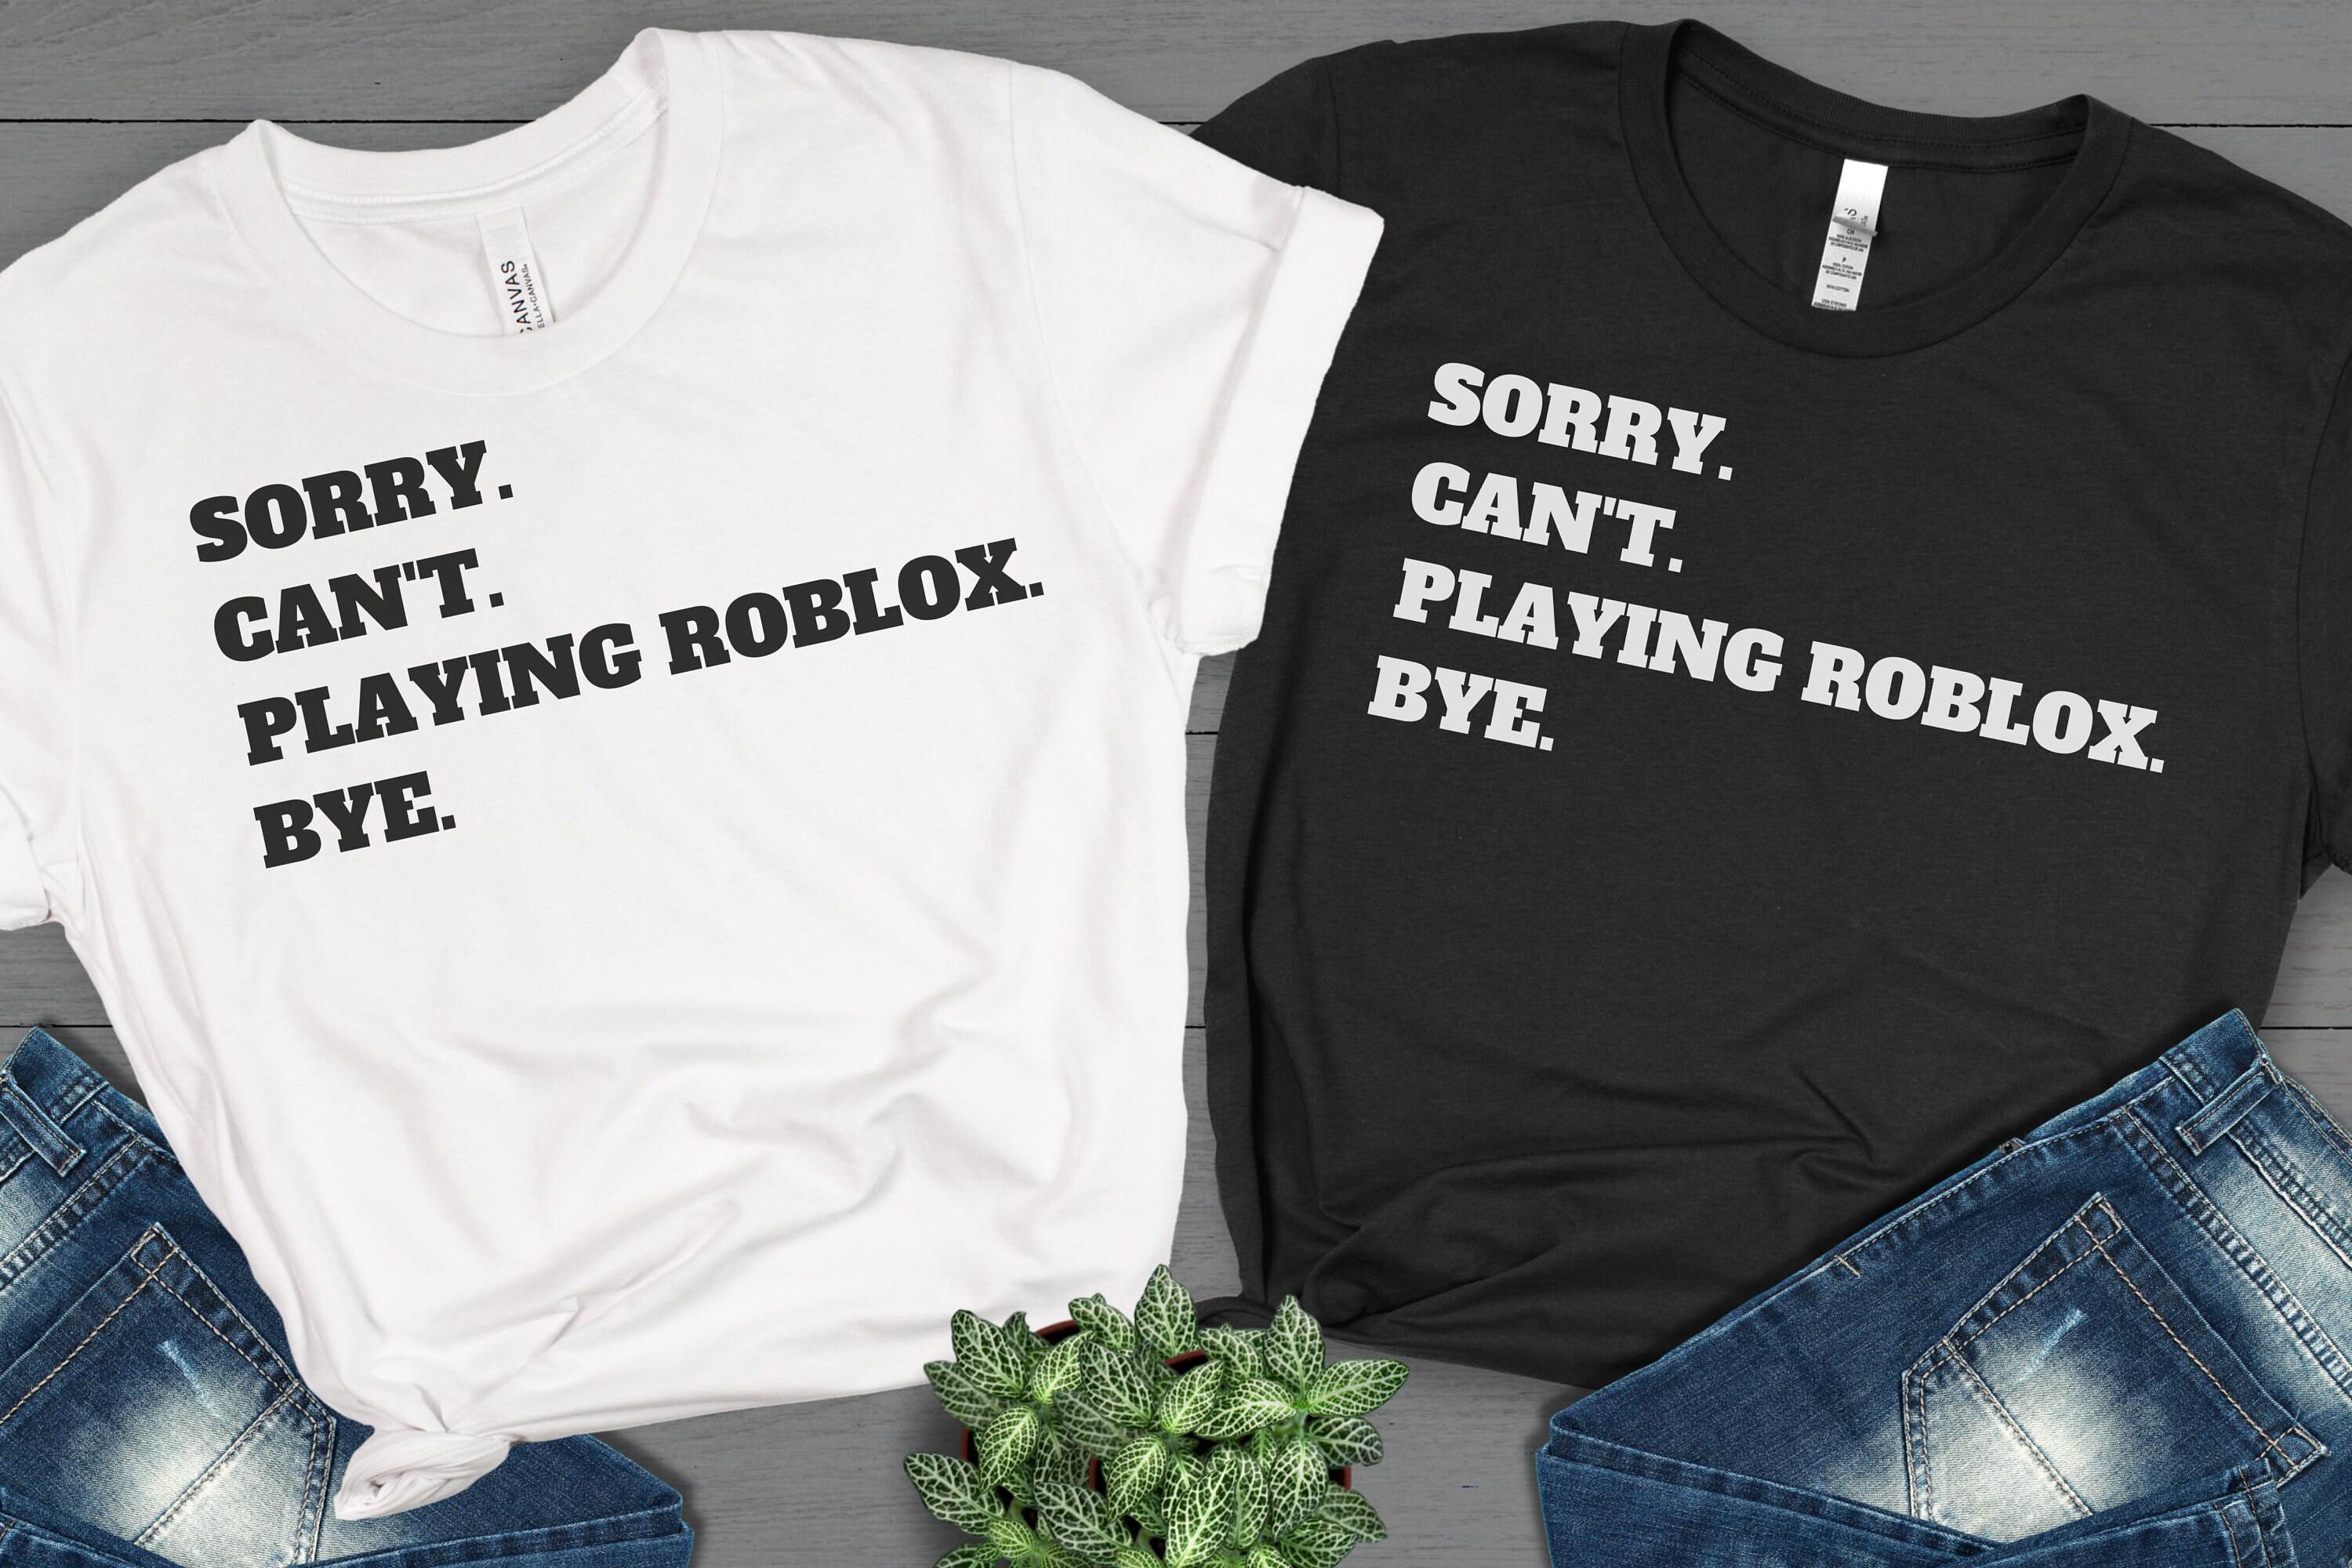 Can't Hear You I'm Gaming Roblox T-Shirt